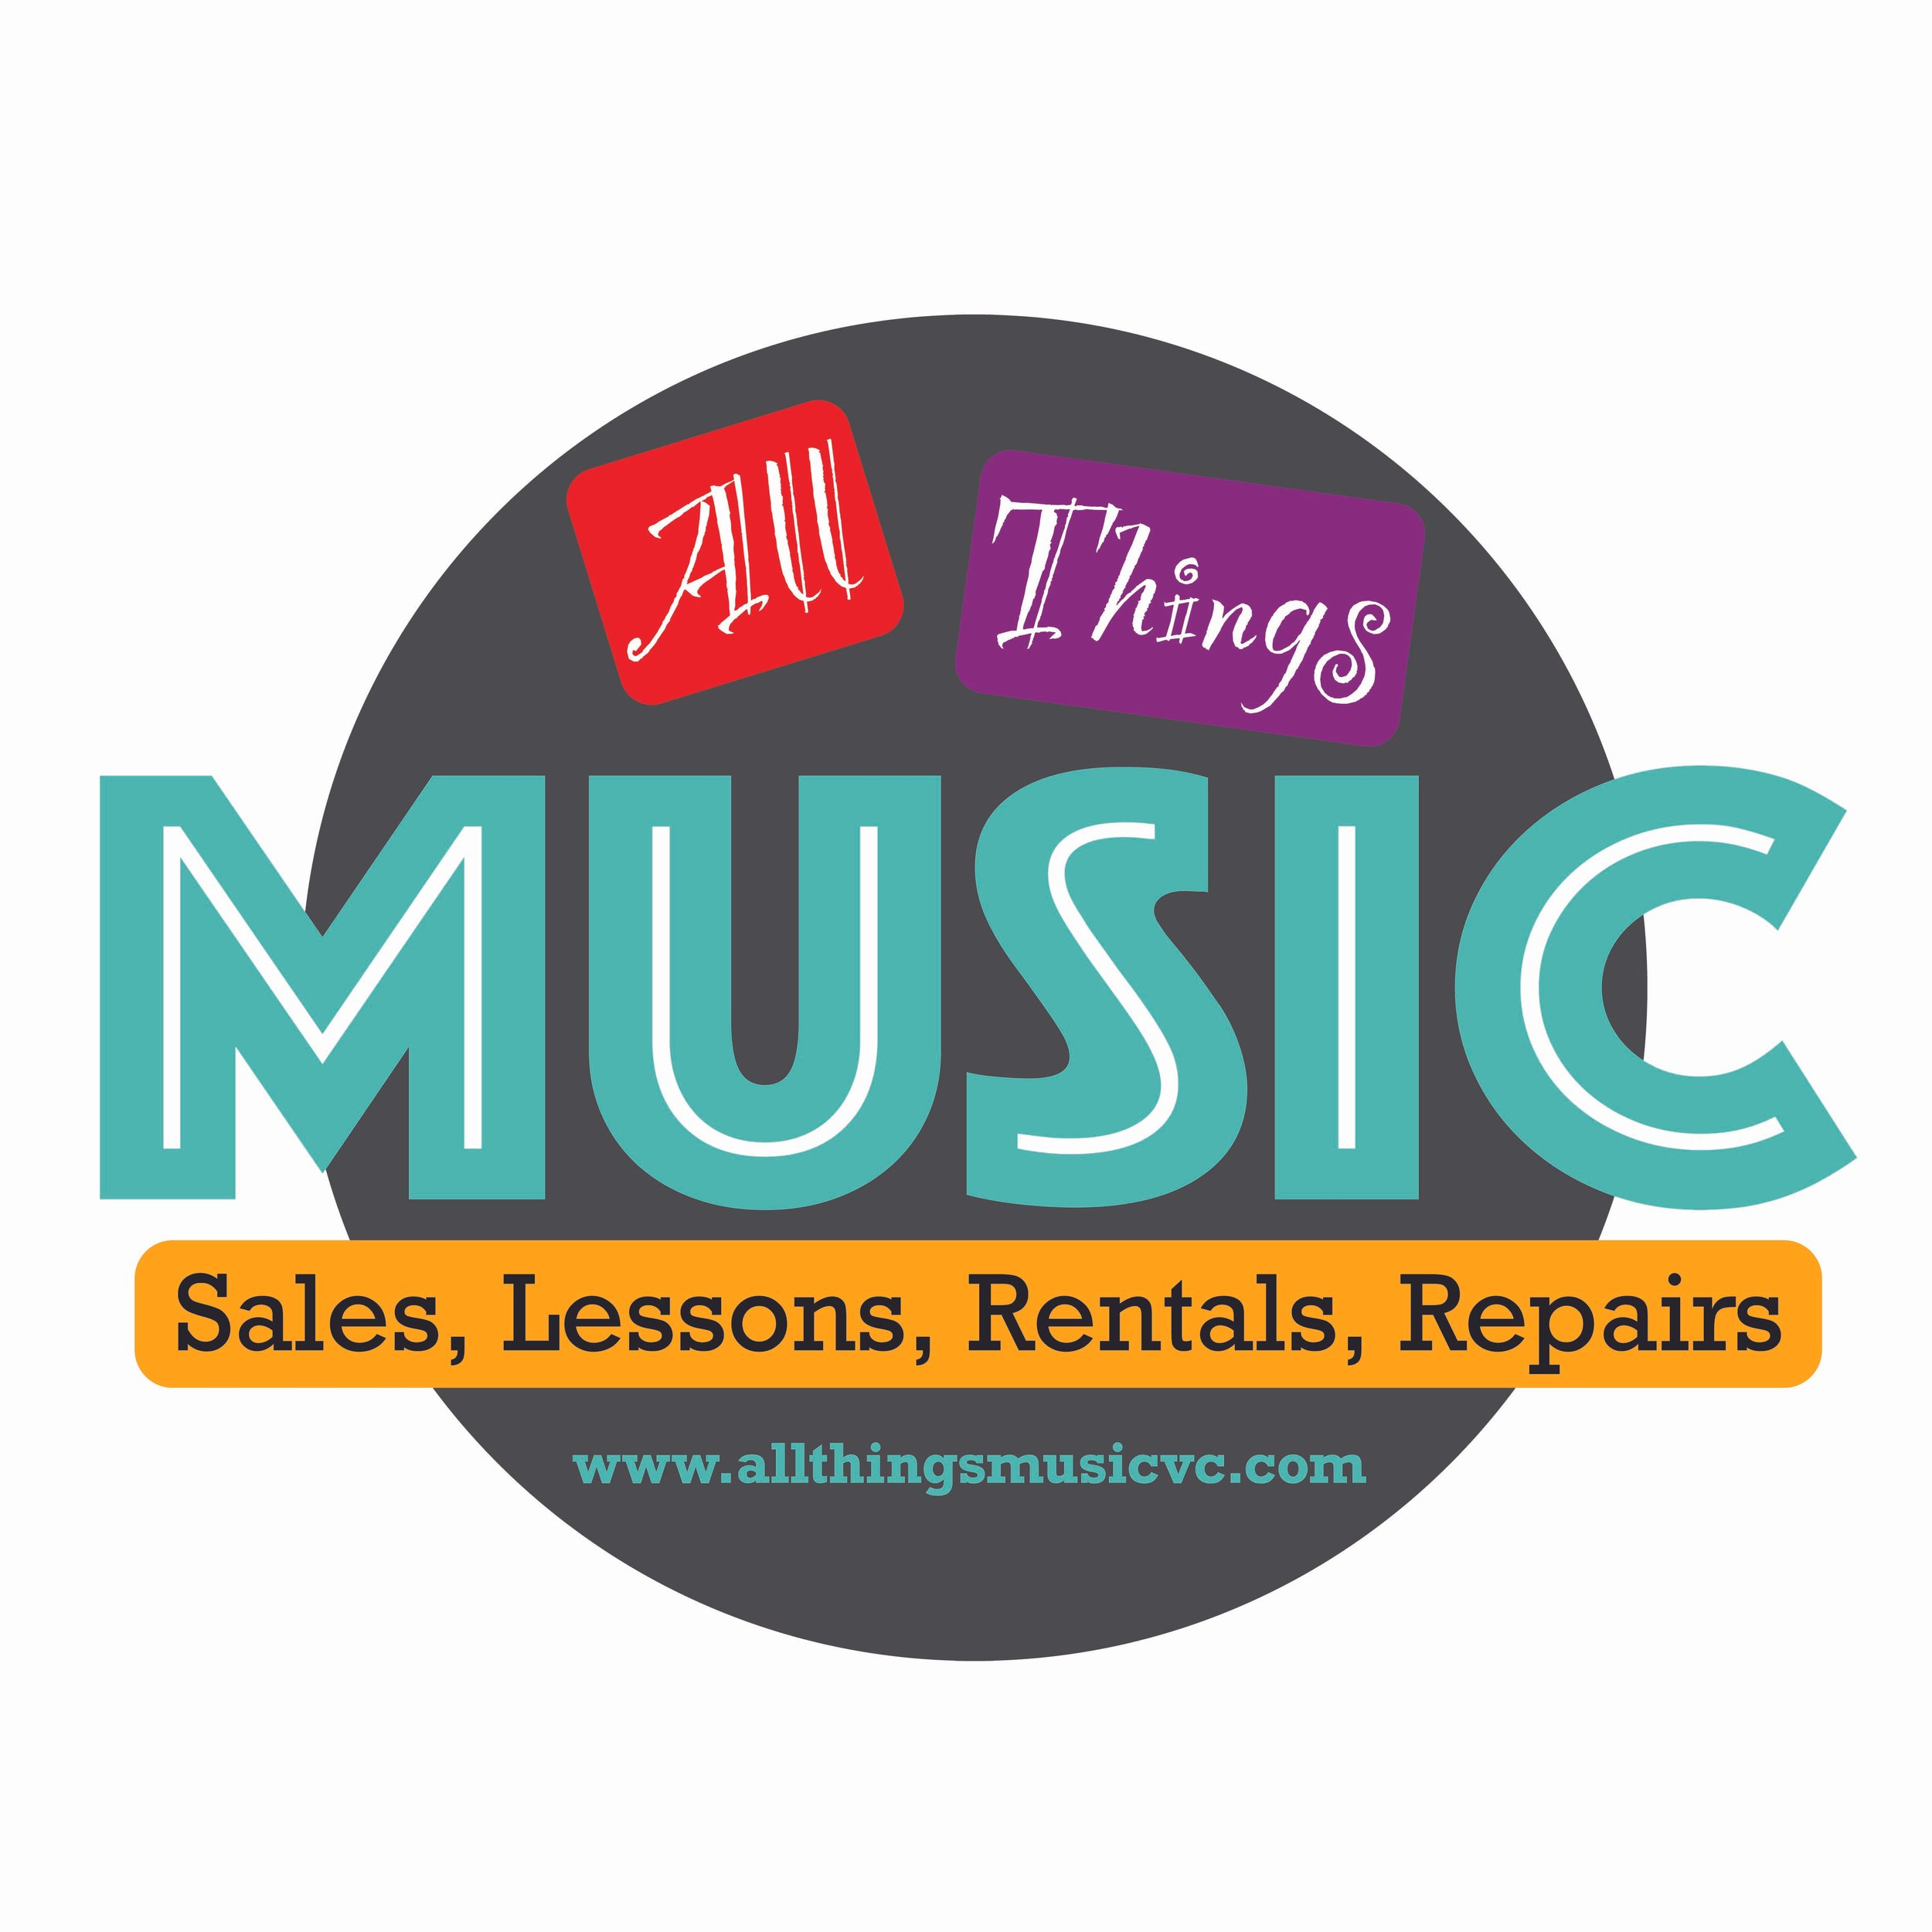 All Things Music